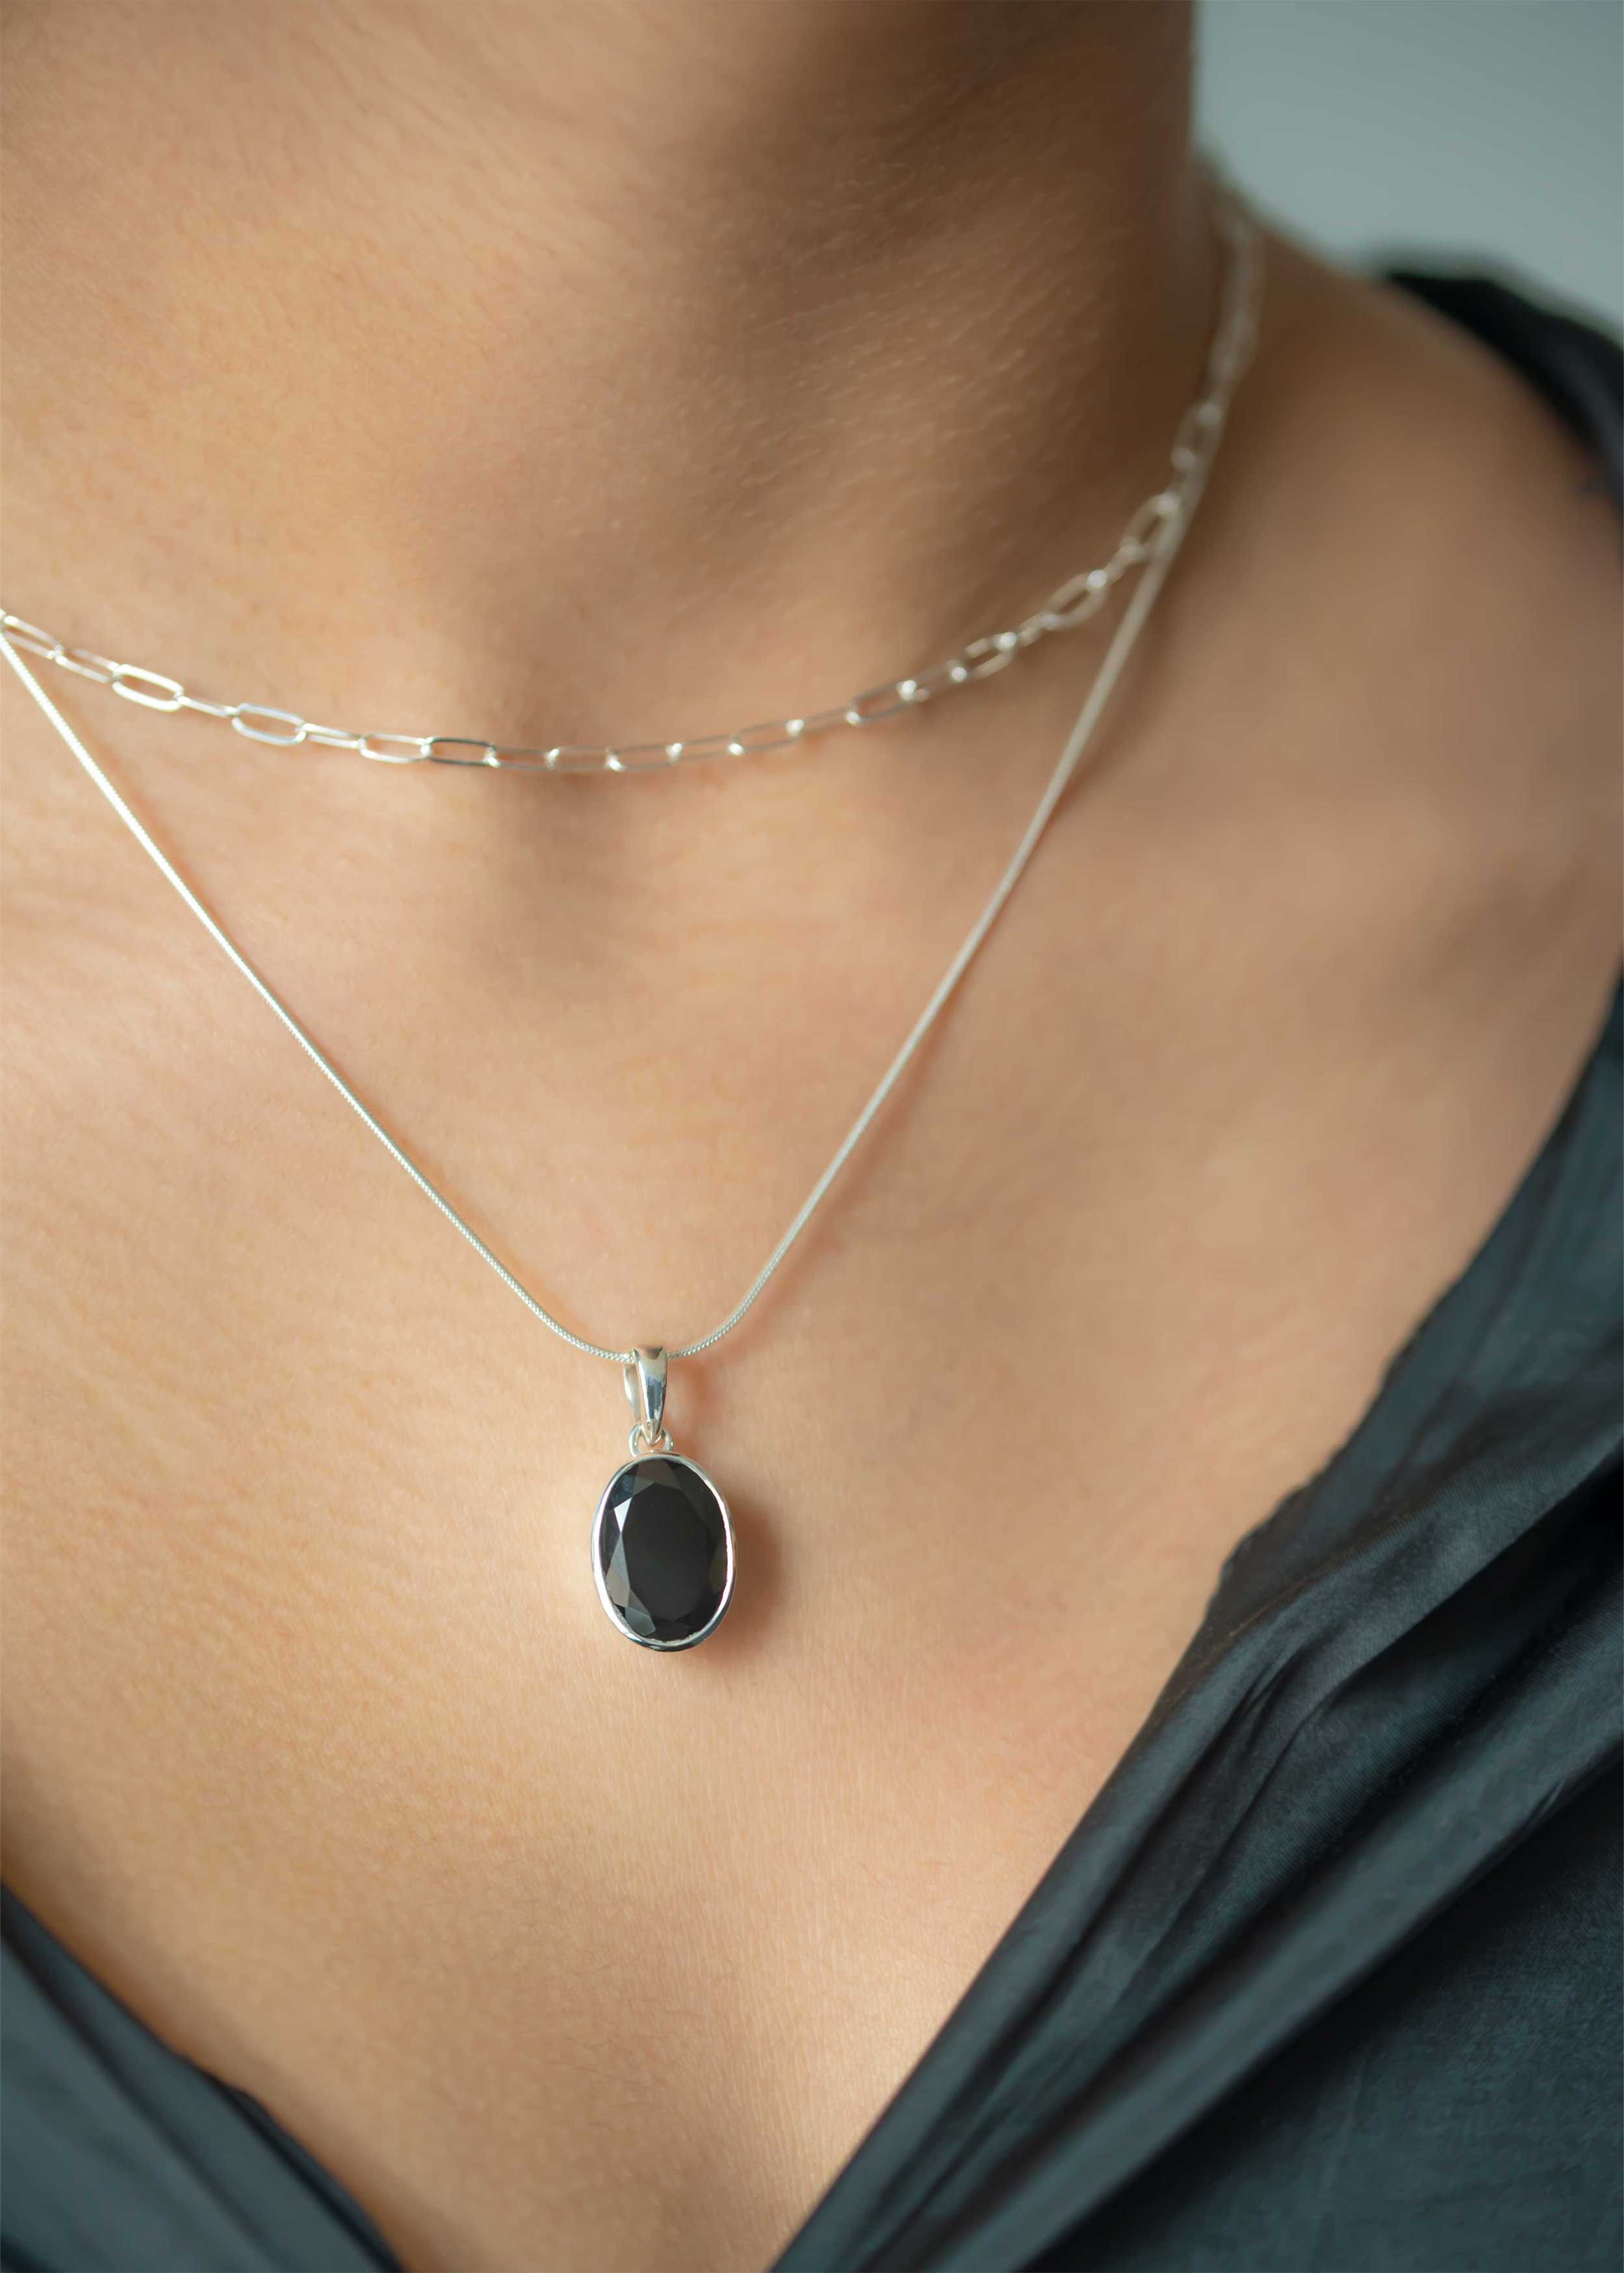 Black Onyx Pendant Necklace oval womens gifts sterling silver